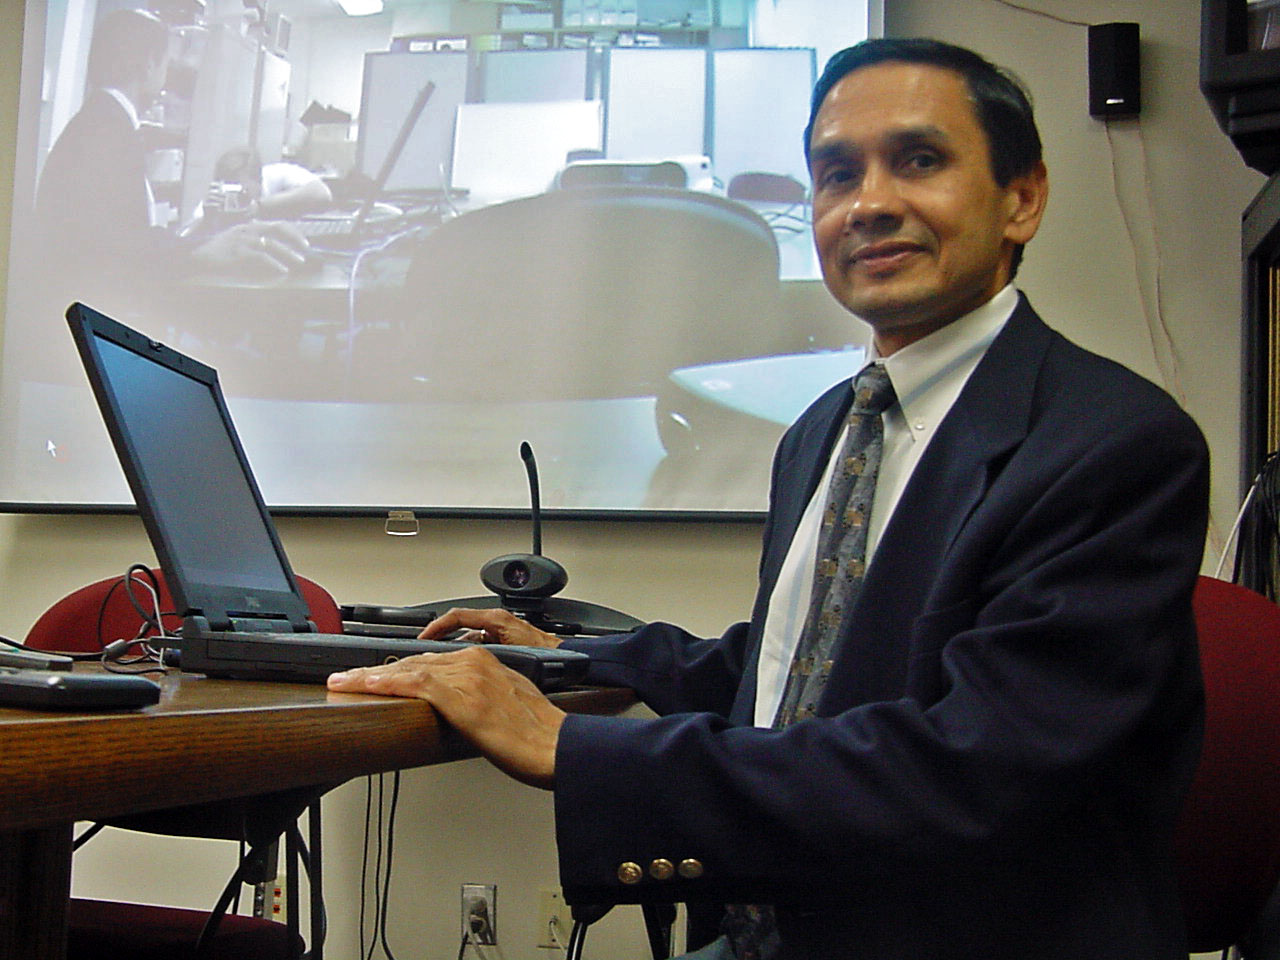 Ramesh Sharda, Oklahoma State University professor and head of OSU’s Institute for Research in Information Systems, led the team of OSU students and professors who created a virtual ammunition encyclopedia that helps soldiers who handle munitions with their initial training and fieldwork. The encyclopedia provides a realistic, hands-on training environment and can be used on anything from a desktop computer to an iPhone®.